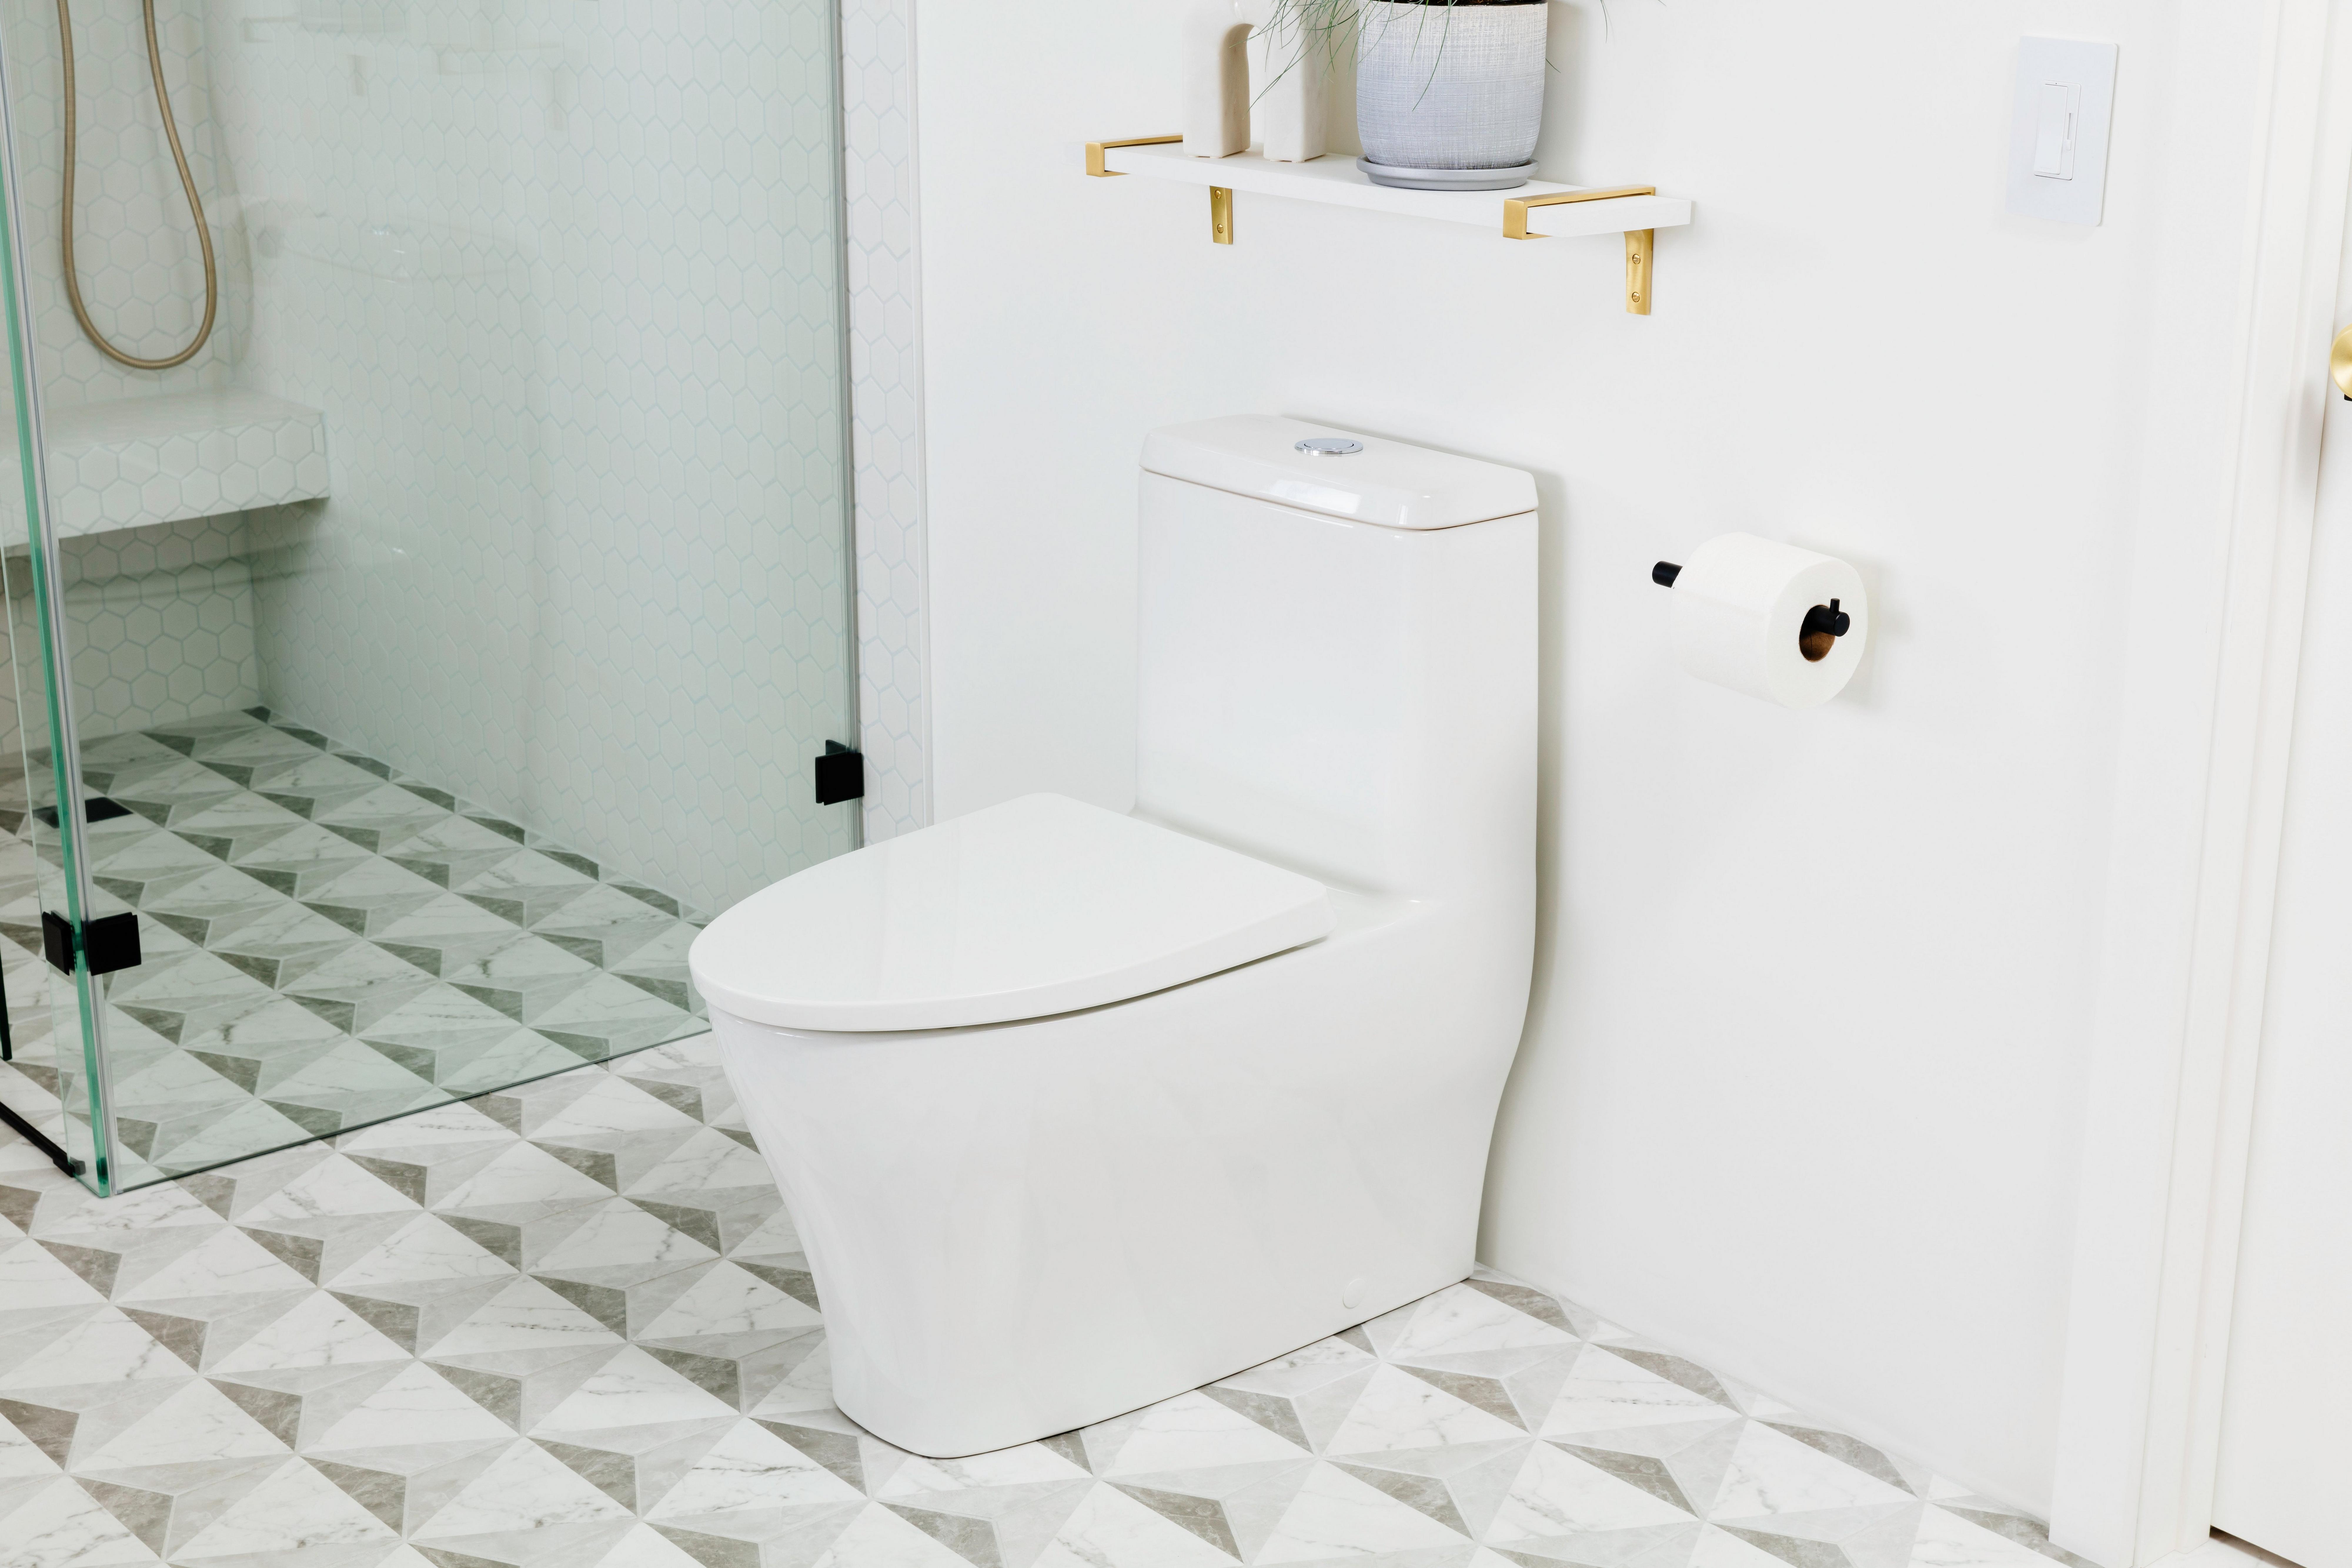 A white one-piece elongated toilet is installed next to a glass shower in a residential bathroom.